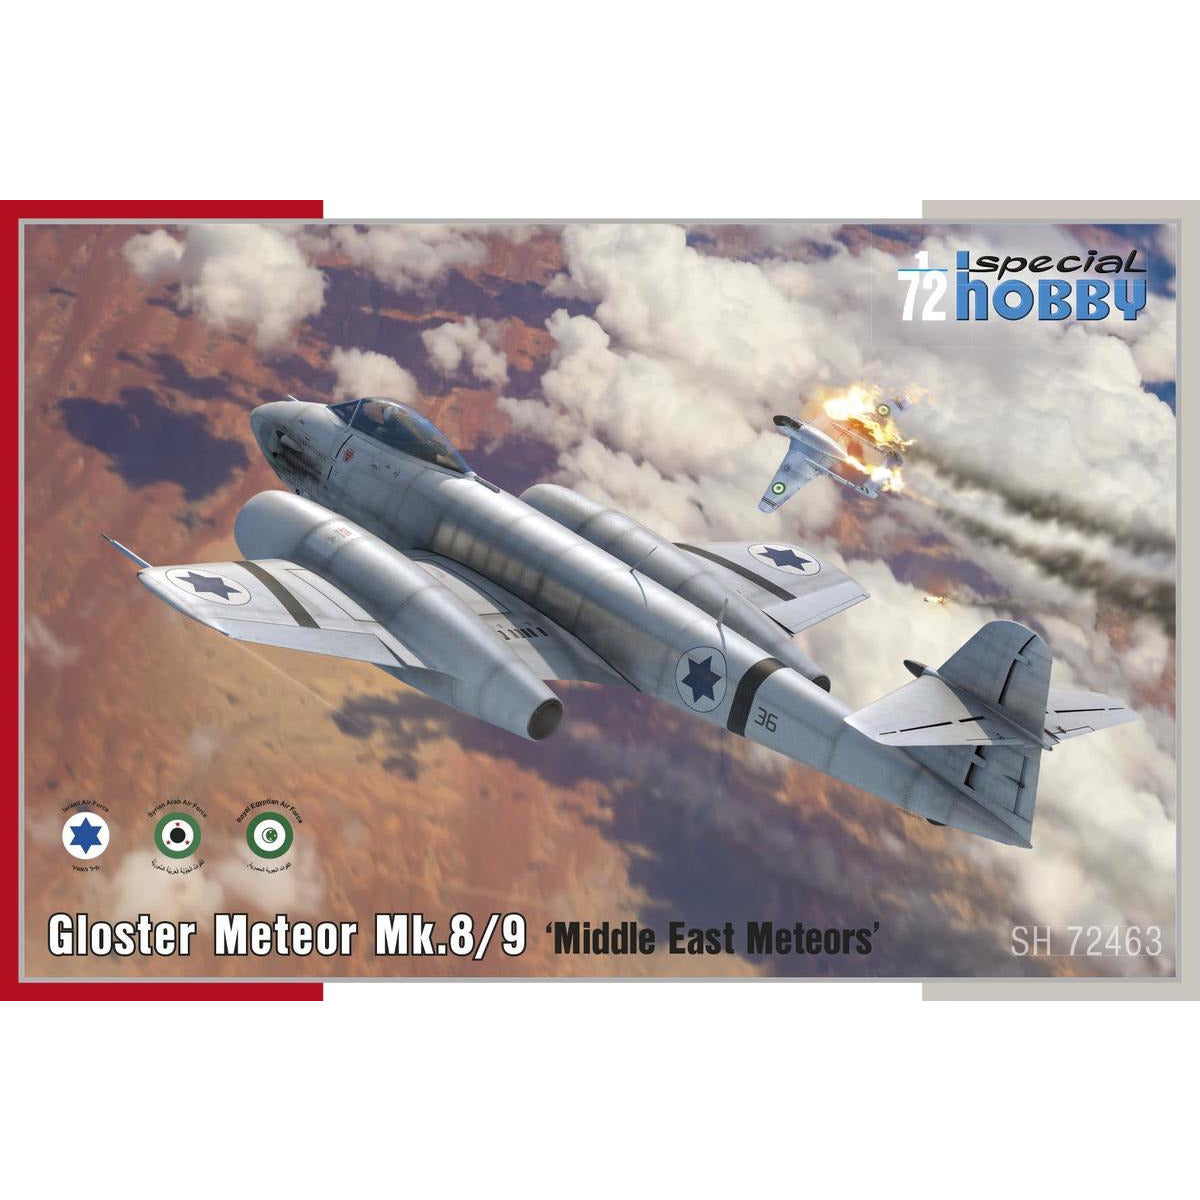 SPECIAL HOBBY 1/72 Gloster Meteor Mk.8/9 Middle East Meteors